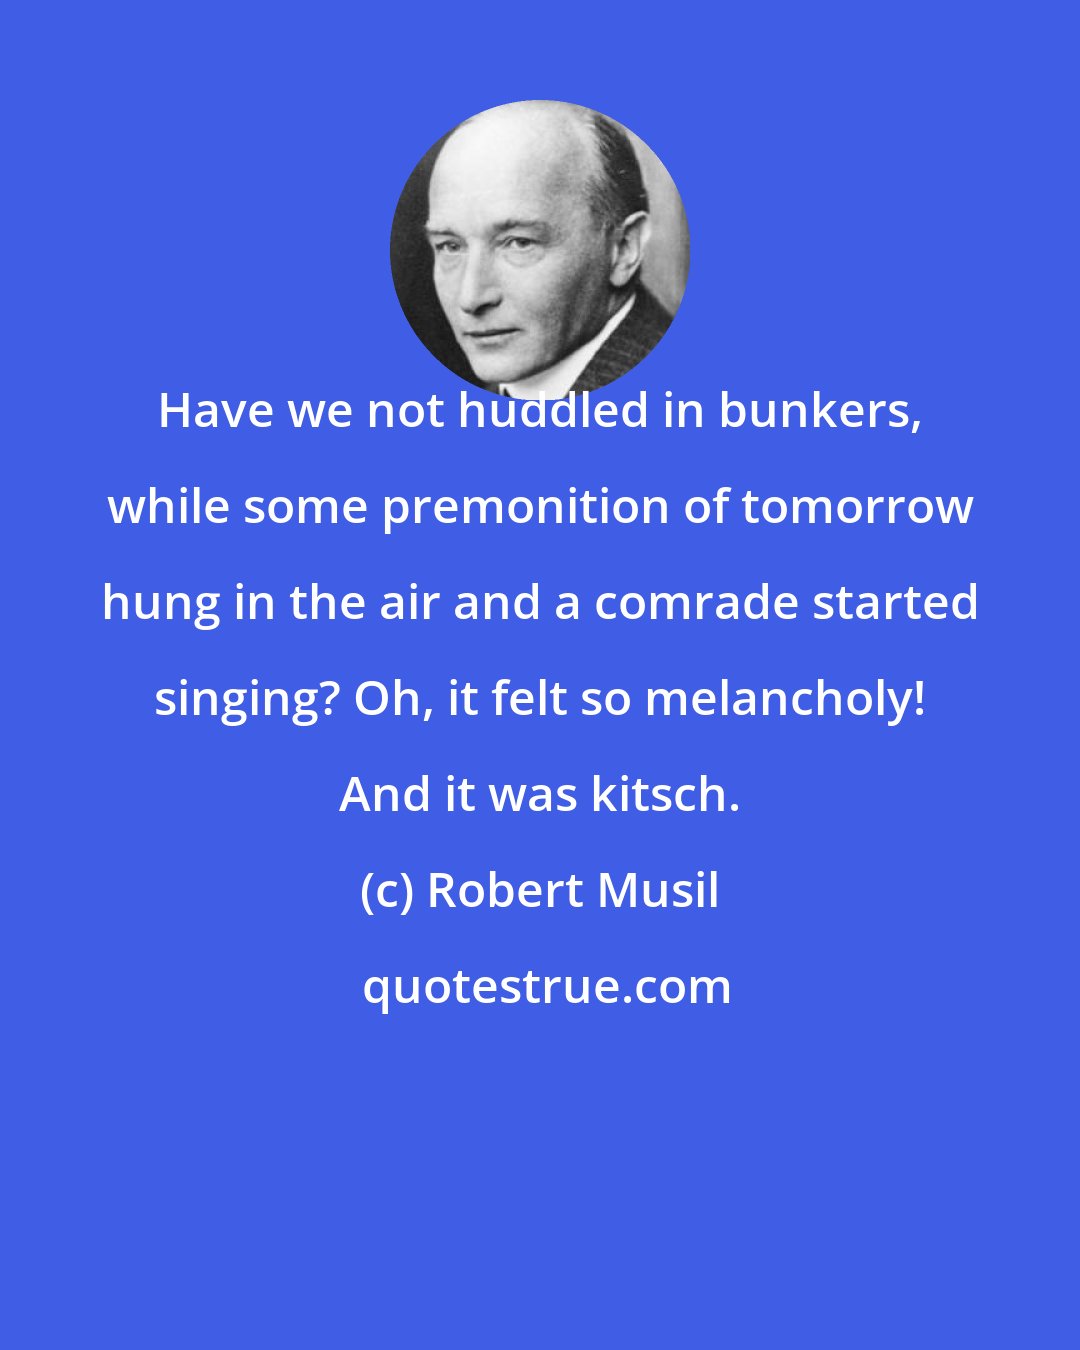 Robert Musil: Have we not huddled in bunkers, while some premonition of tomorrow hung in the air and a comrade started singing? Oh, it felt so melancholy! And it was kitsch.